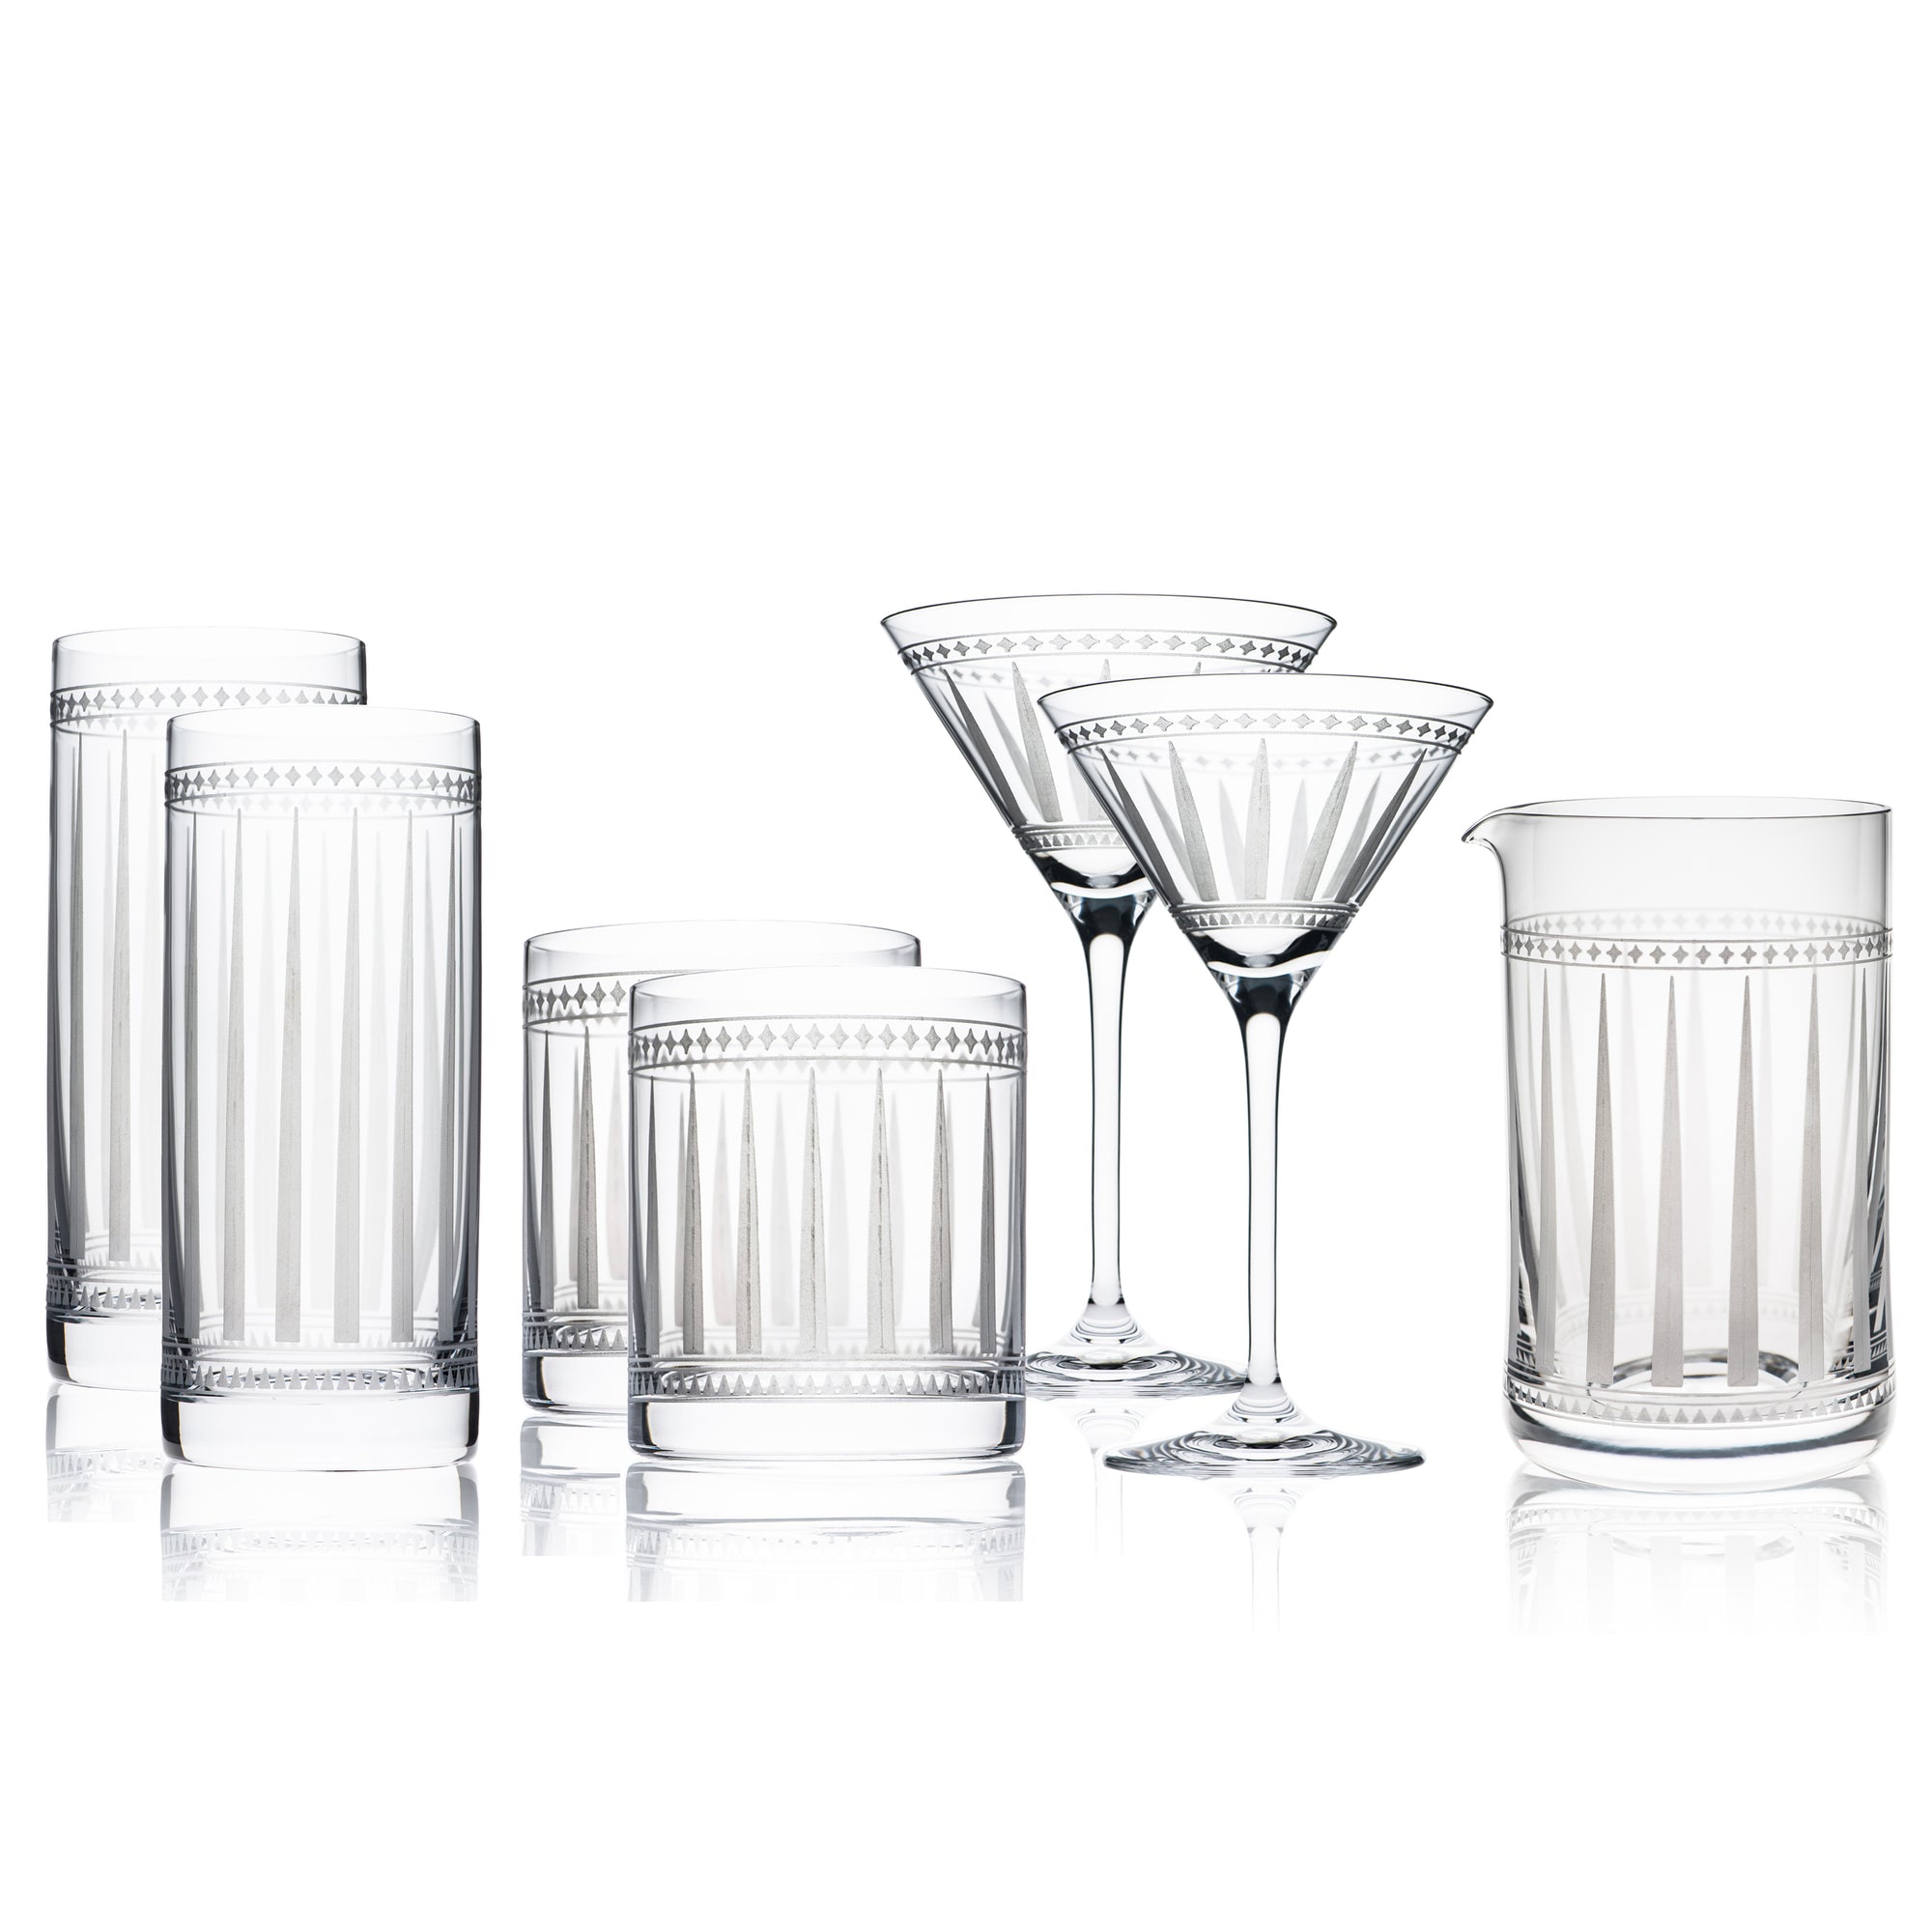 Marrakech Crystal Cocktail COllection - diamond-etched set includes 2 highball glasses, 2 on-the-rocks glasses, 2 martini glasses and a mixing glass from Caskata